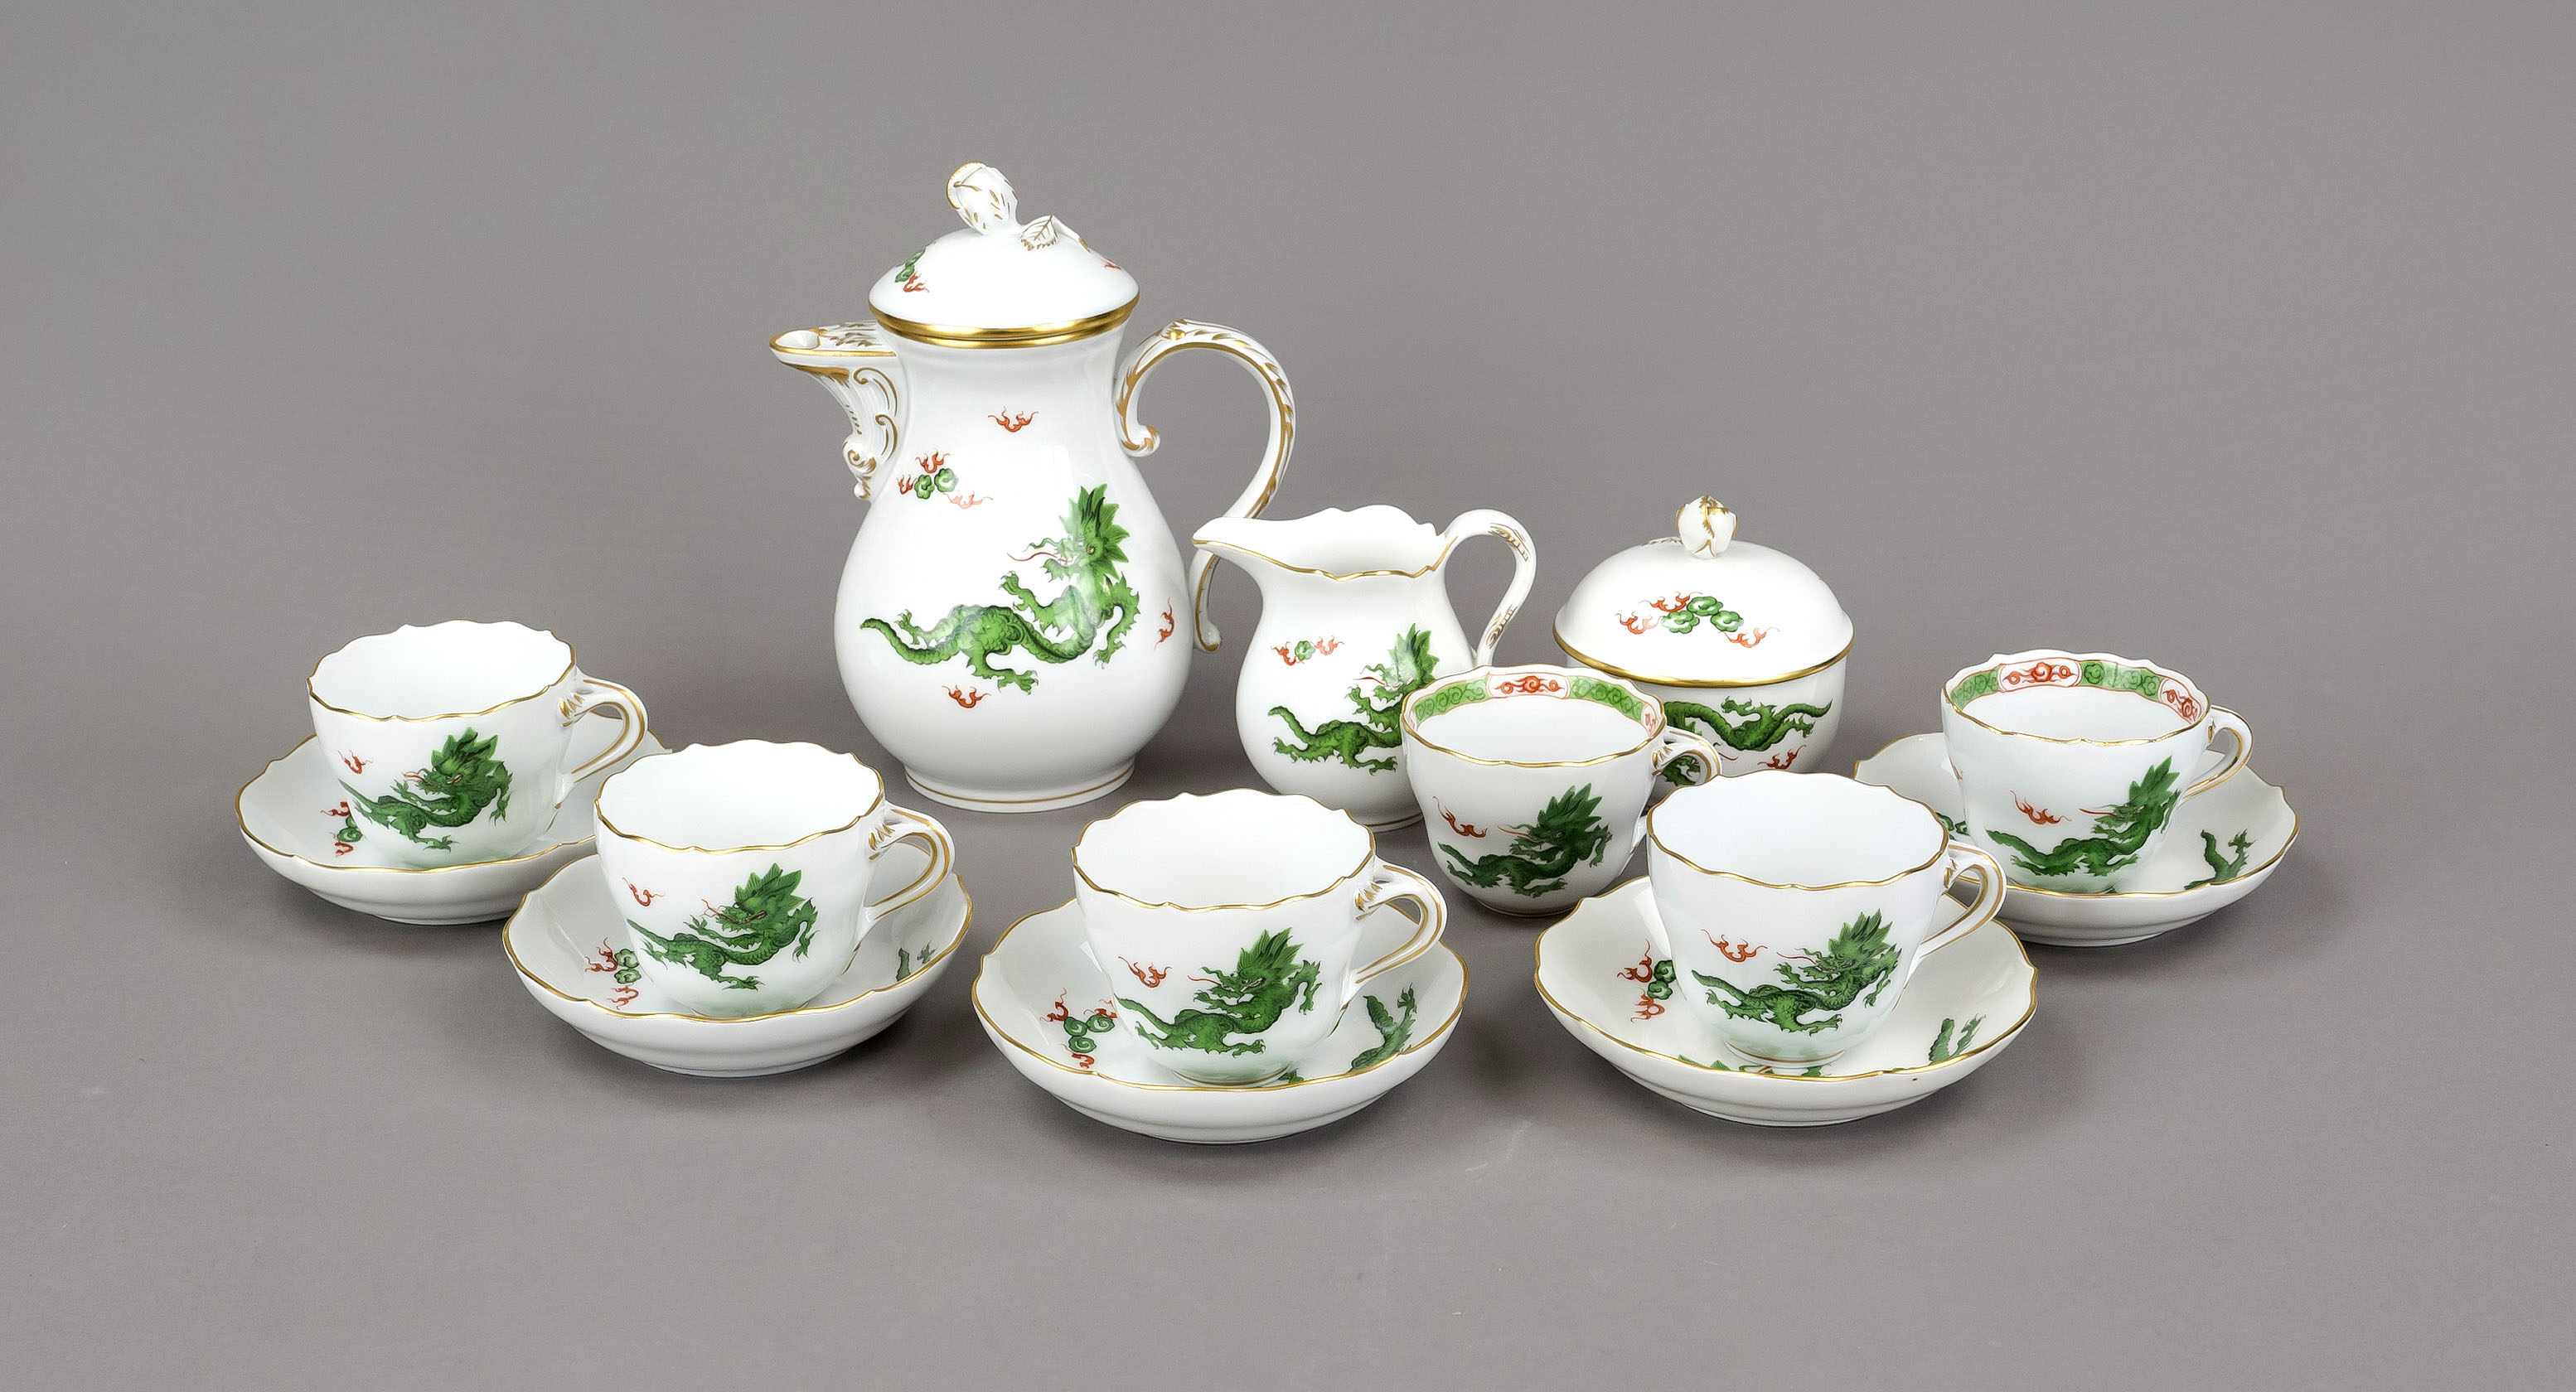 Mocha service for 5 persons, 14-piece, Meissen, marks 1951-80, mostly Deputat, New Cut-out shape,